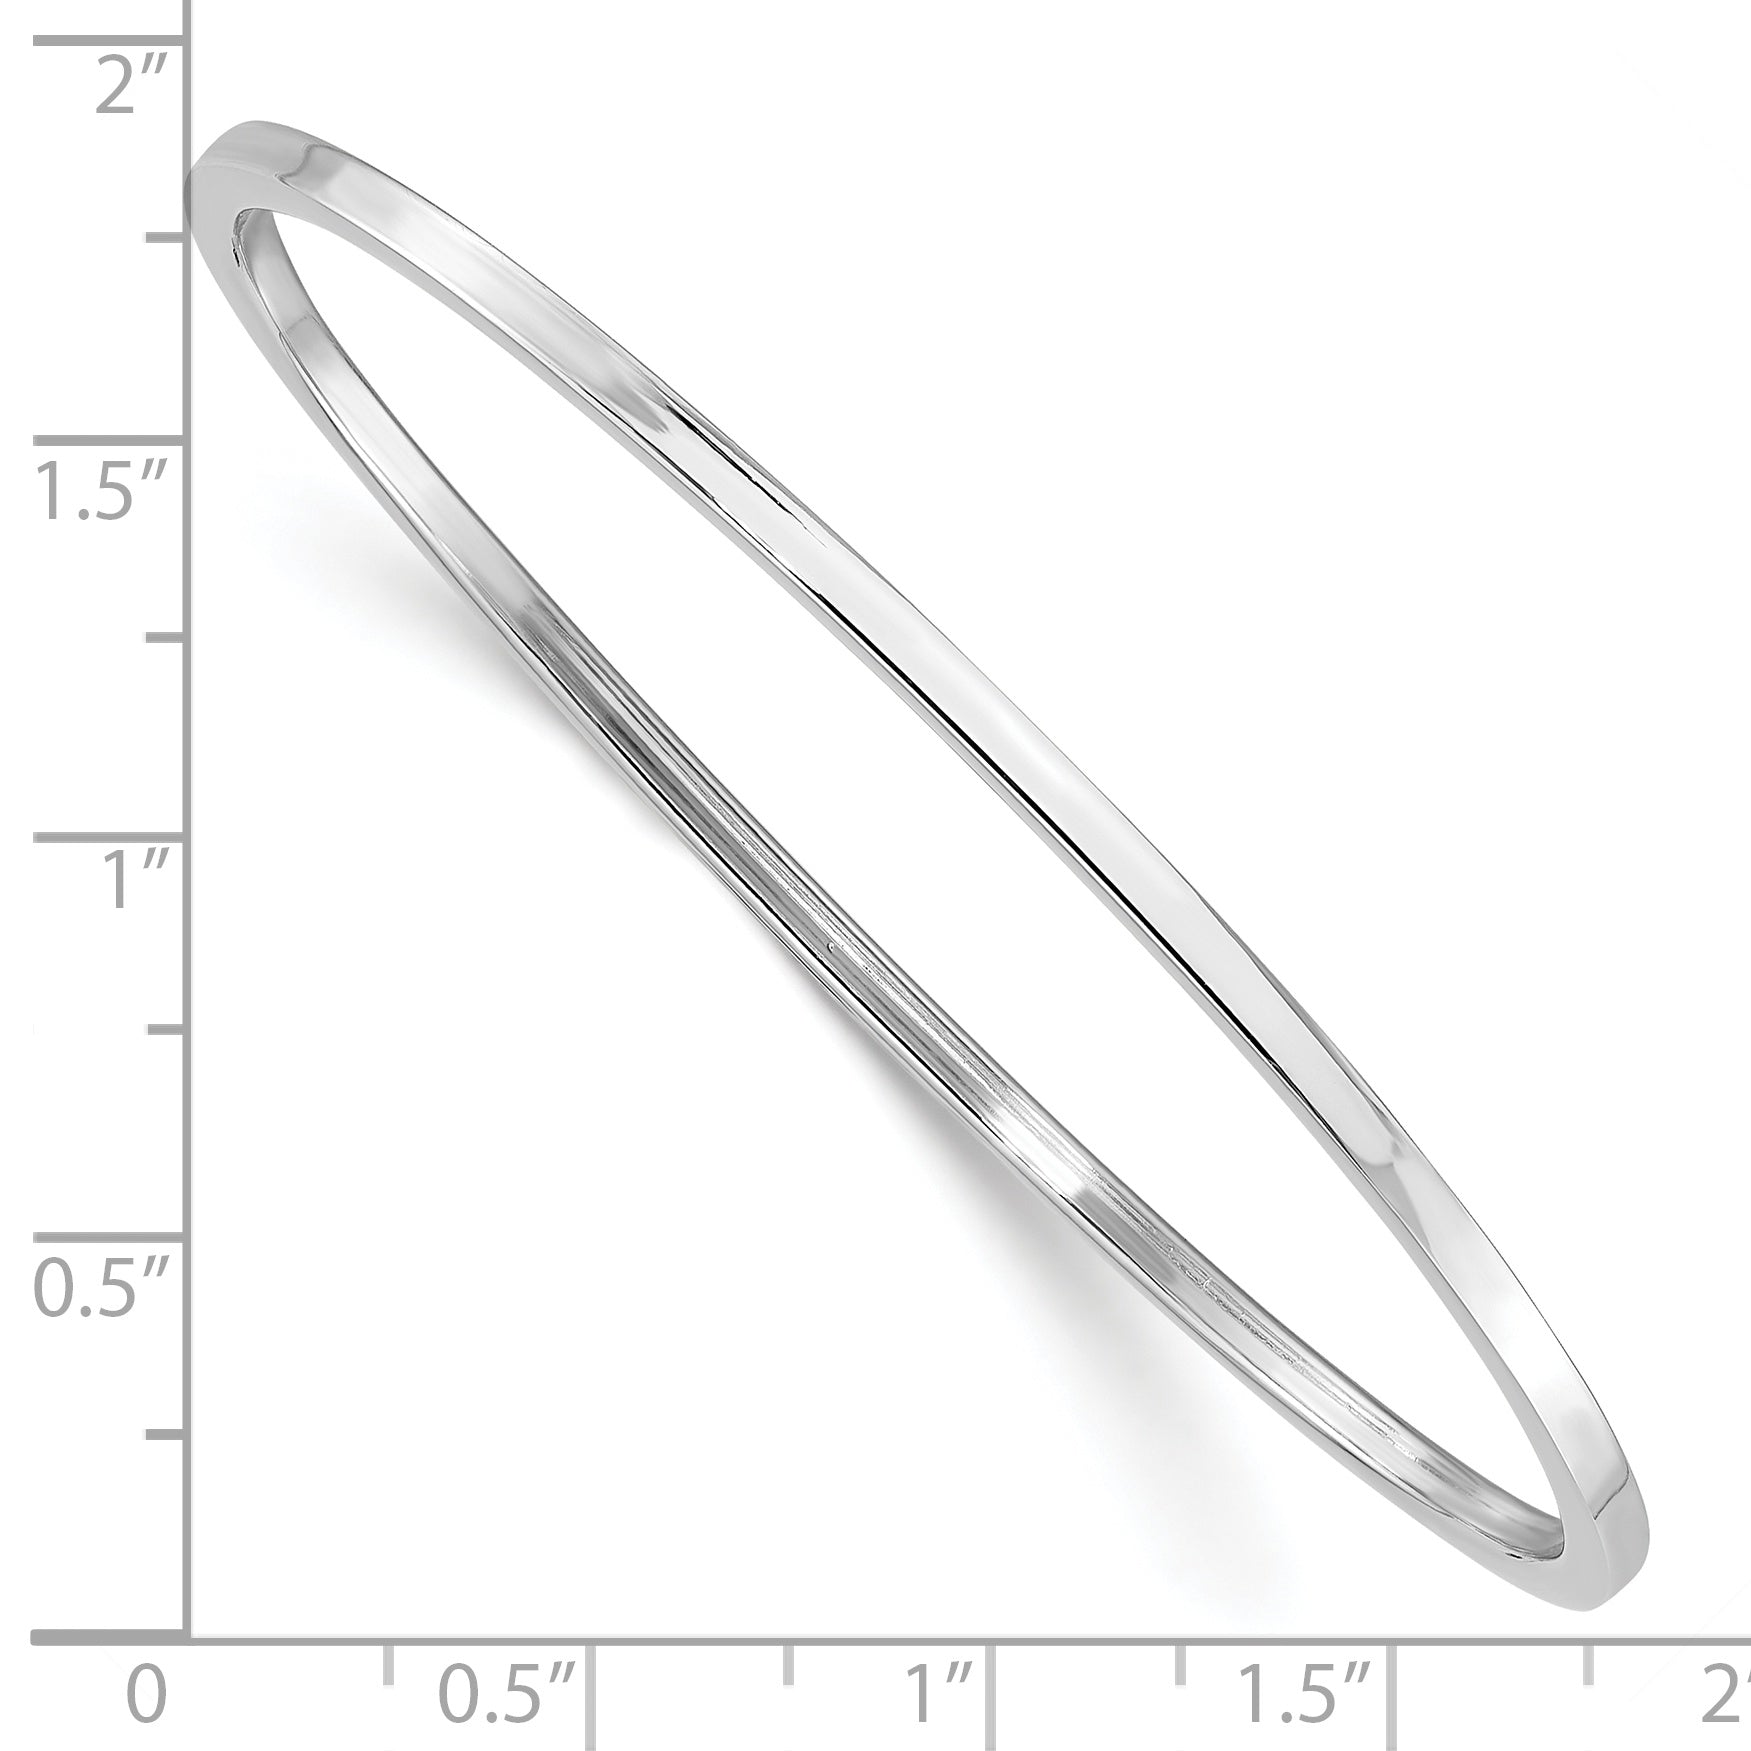 Sterling Silver Rhodium-Plated Polished Slip-on Child's Bangle